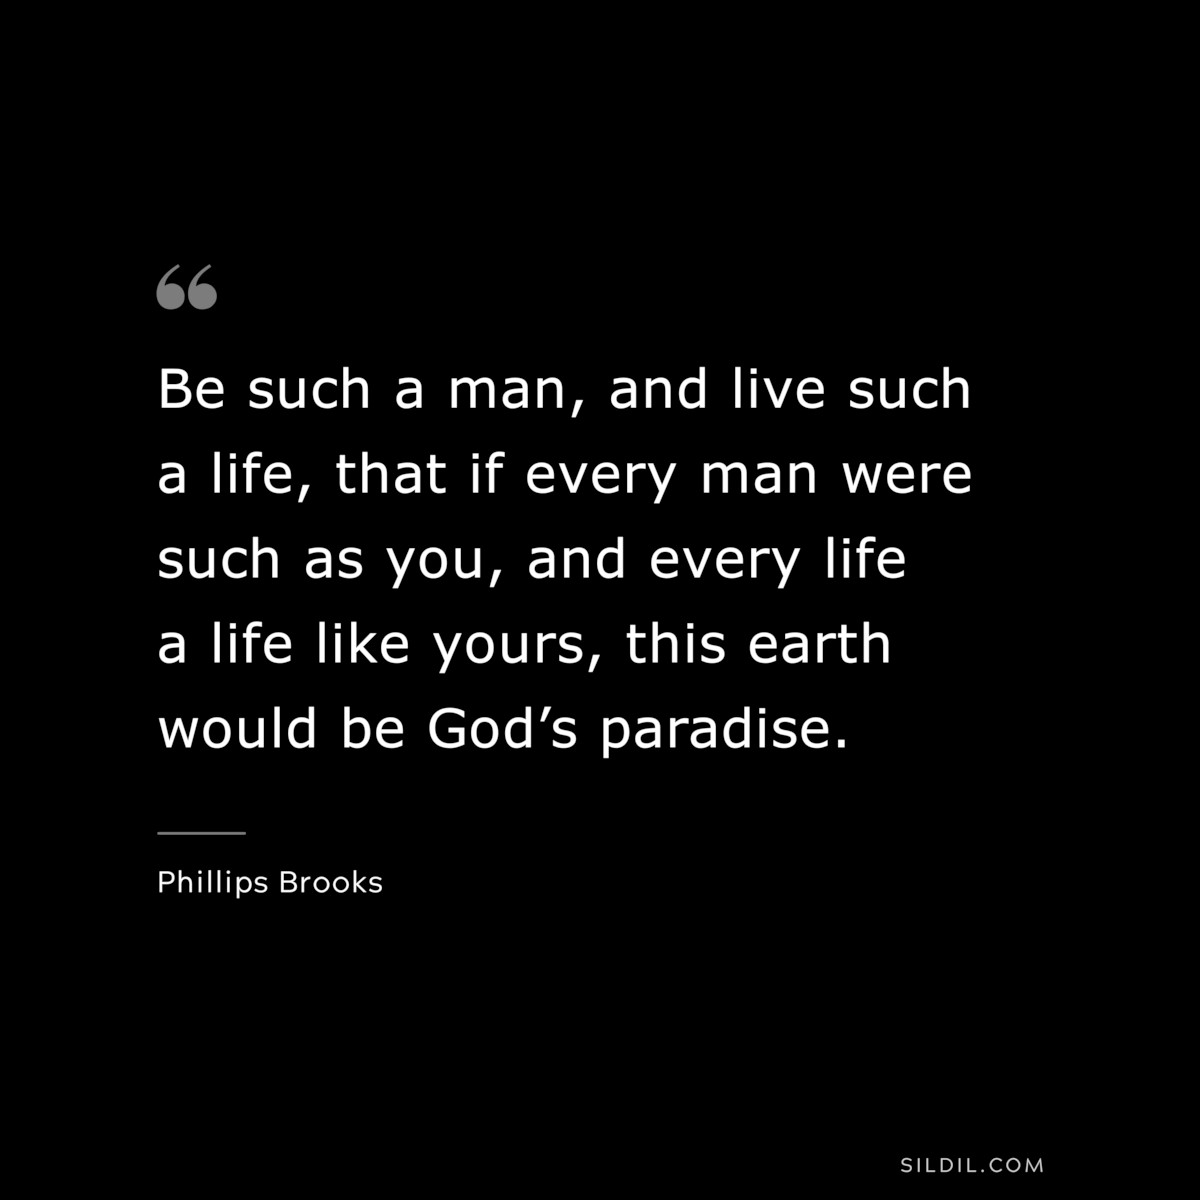 Be such a man, and live such a life, that if every man were such as you, and every life a life like yours, this earth would be God’s paradise. ― Phillips Brooks